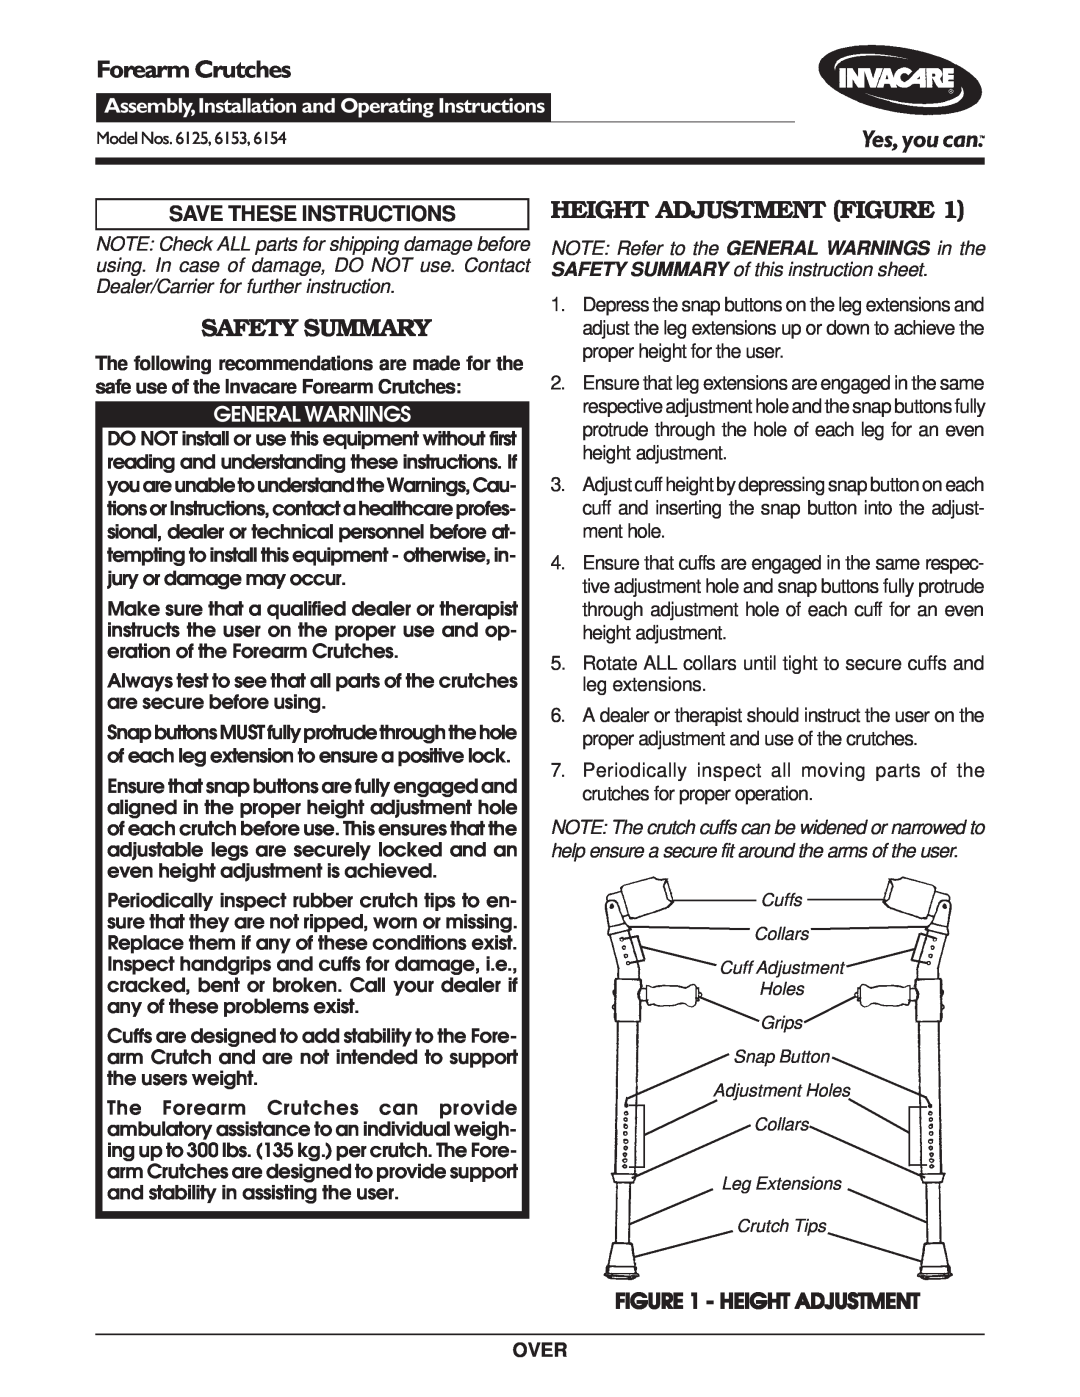 Invacare 6154 operating instructions Safety Summary, Height Adjustment Figure, Forearm Crutches, Save These Instructions 